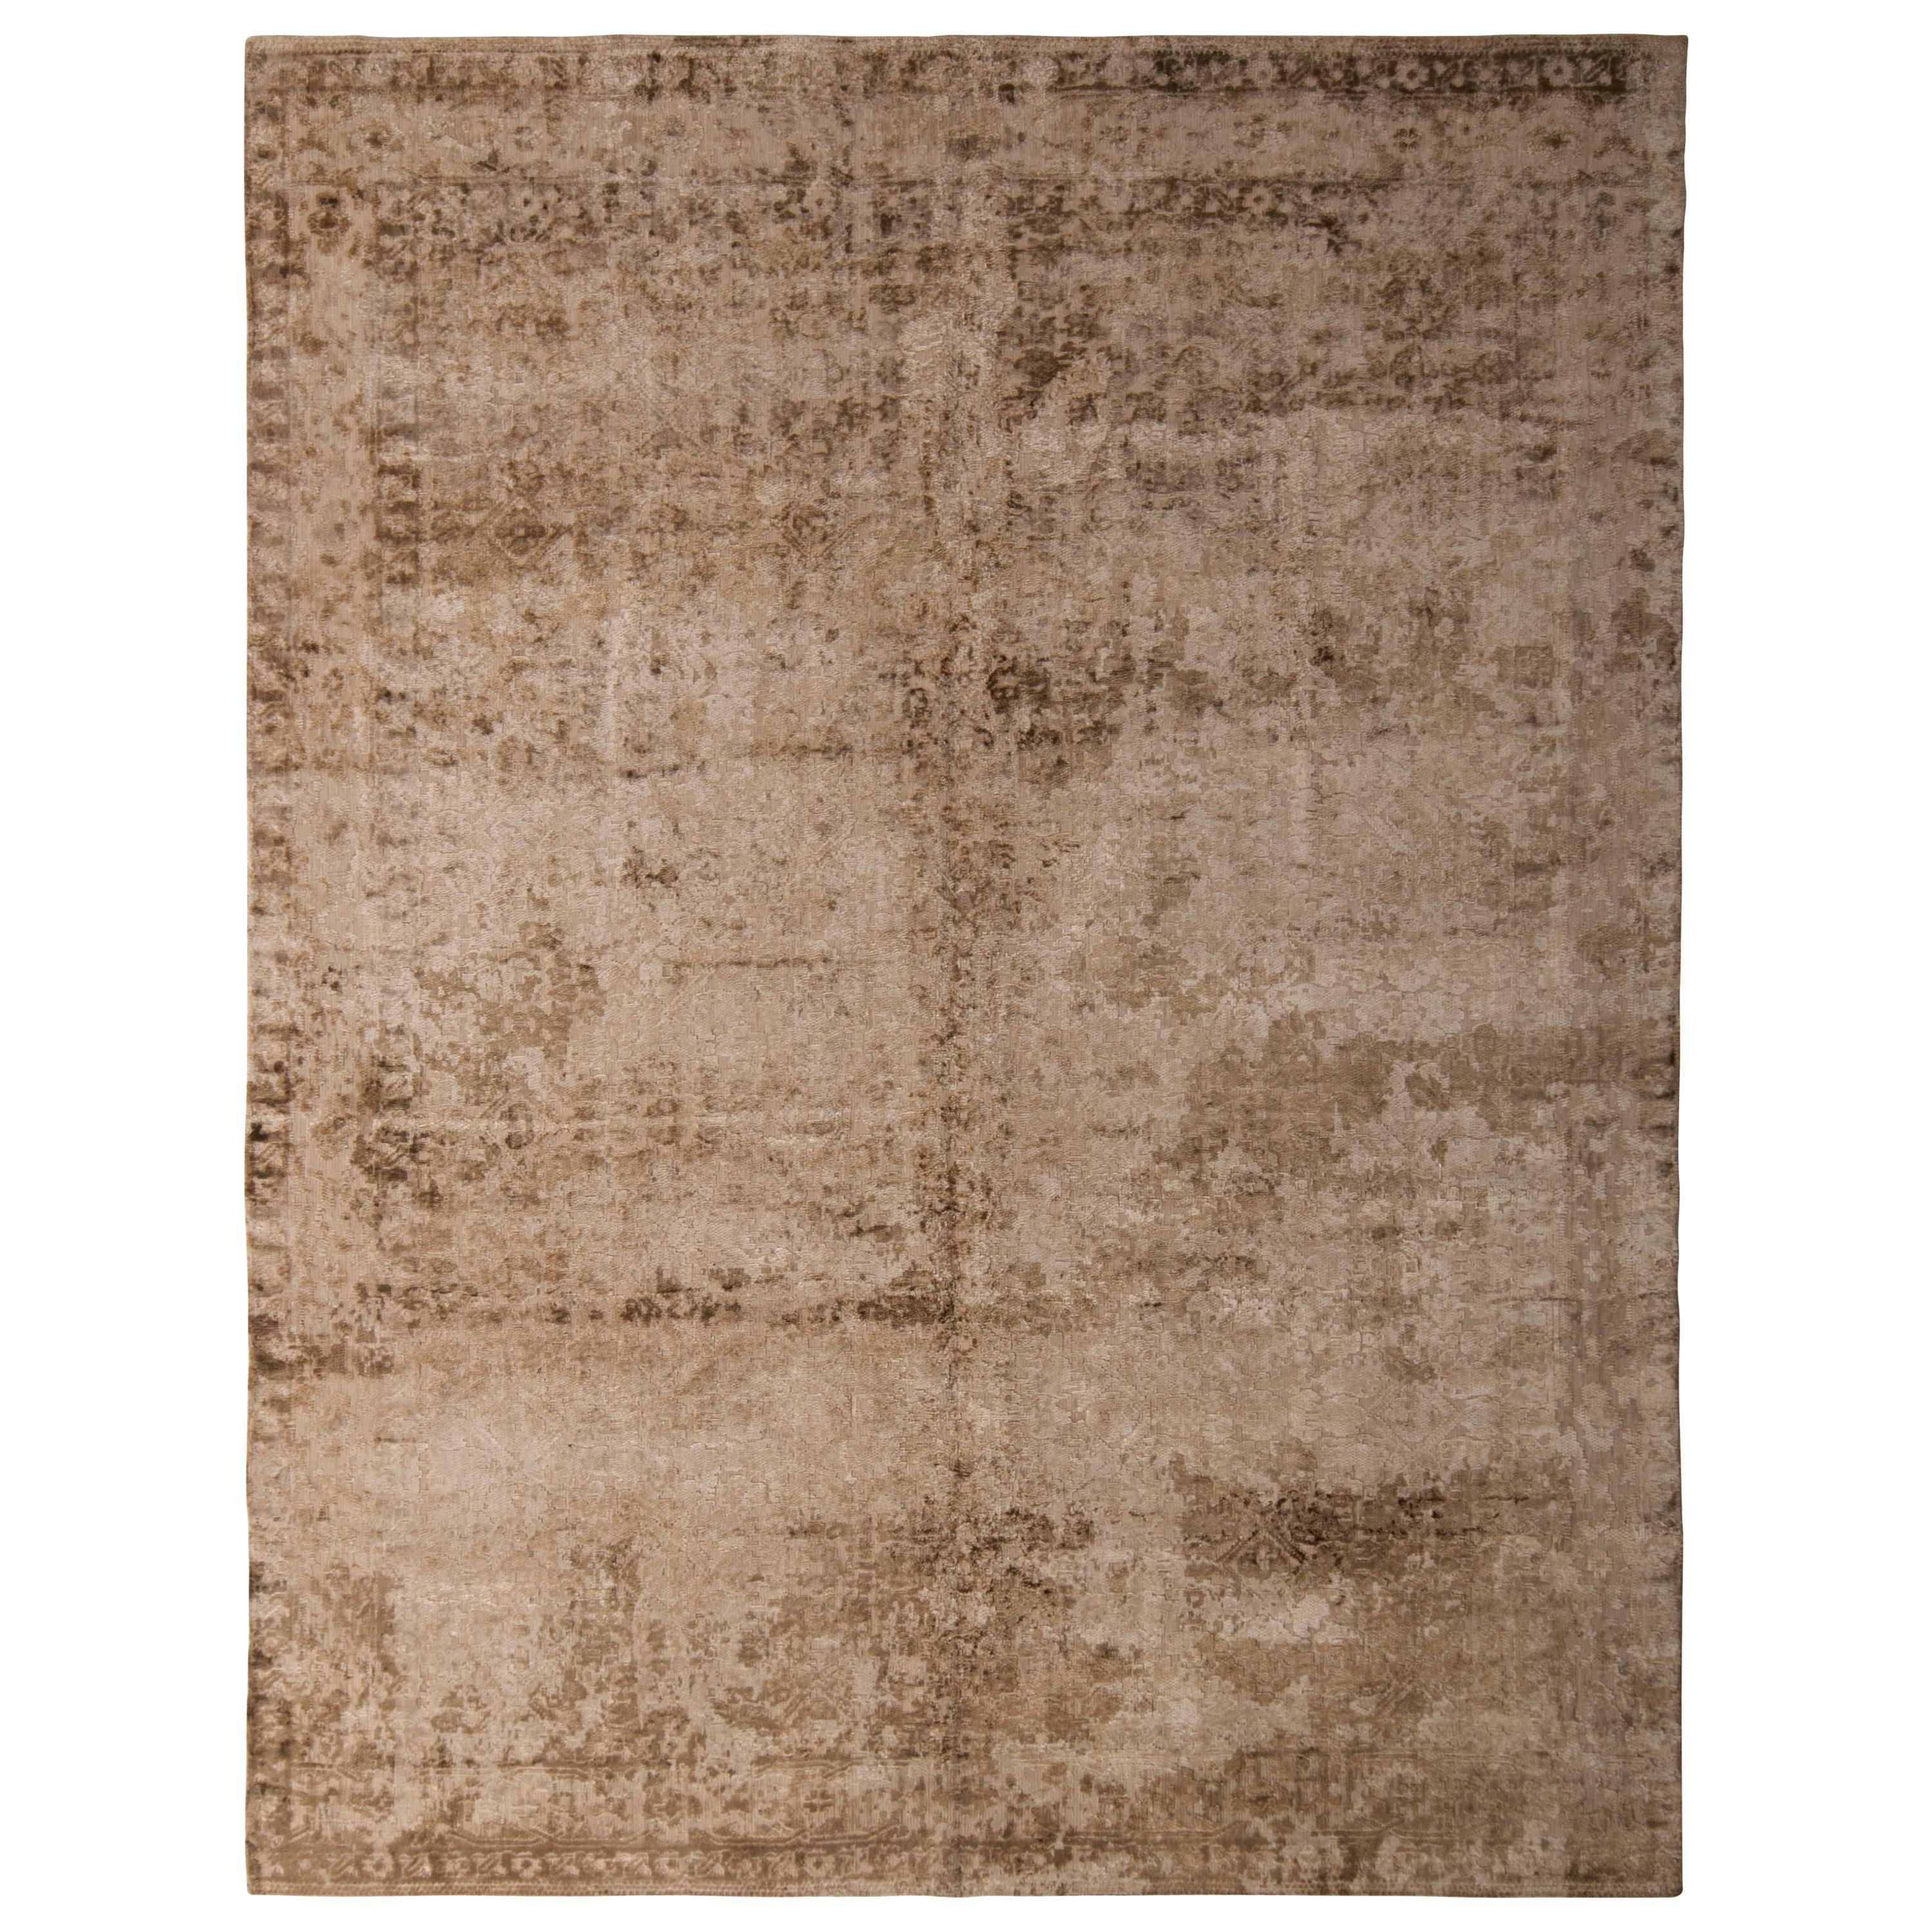 Rug & Kilim 's Hand Knotted Traditional Silk Rug Beige Brown Herati Pattern